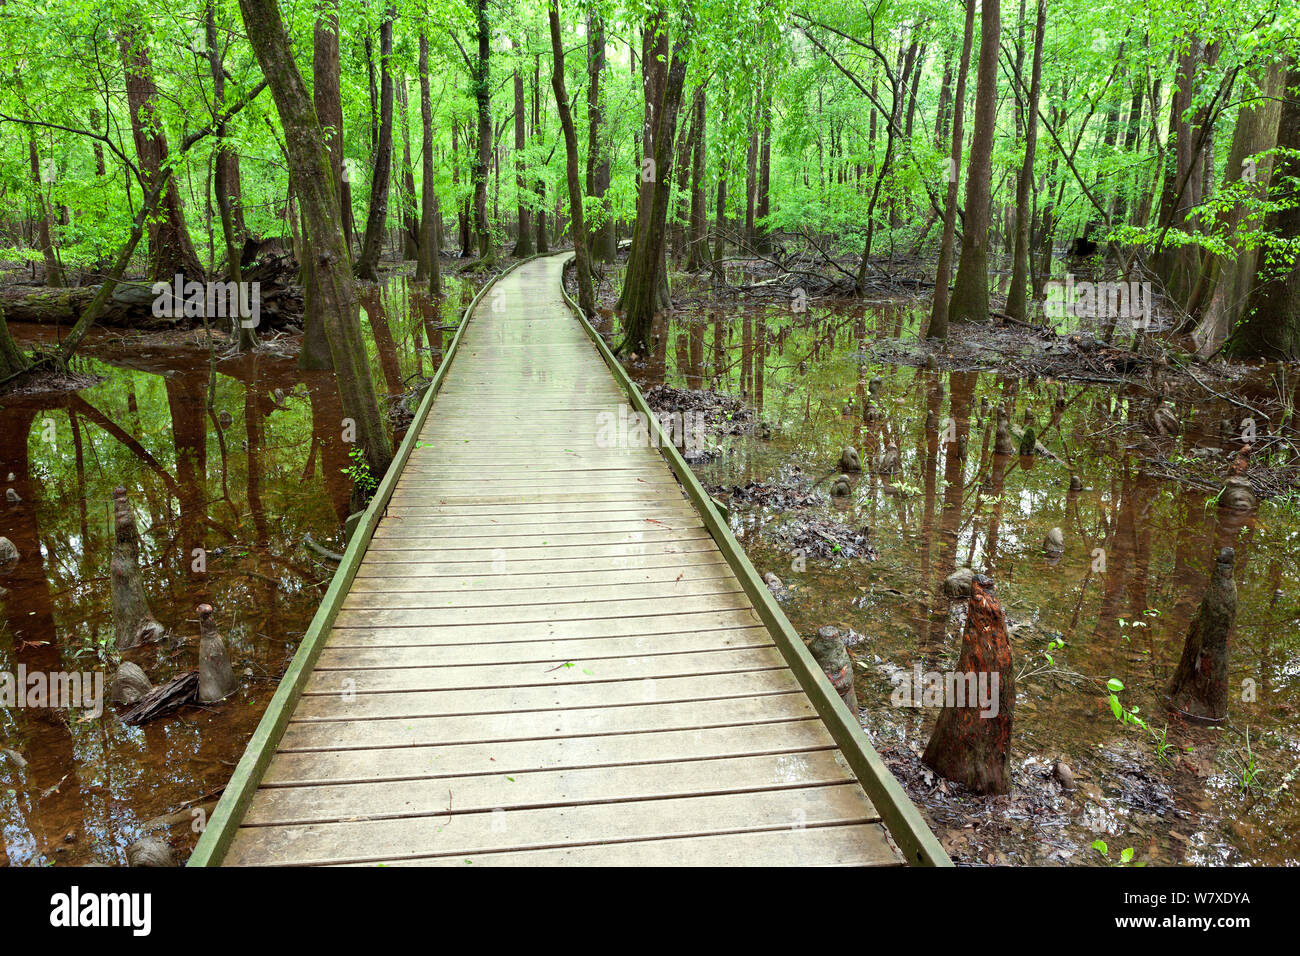 The Boardwalk Trail through swamp with bald cypress (Taxodium distichum) knees in Congaree National Park South Carolina, USA. Stock Photo